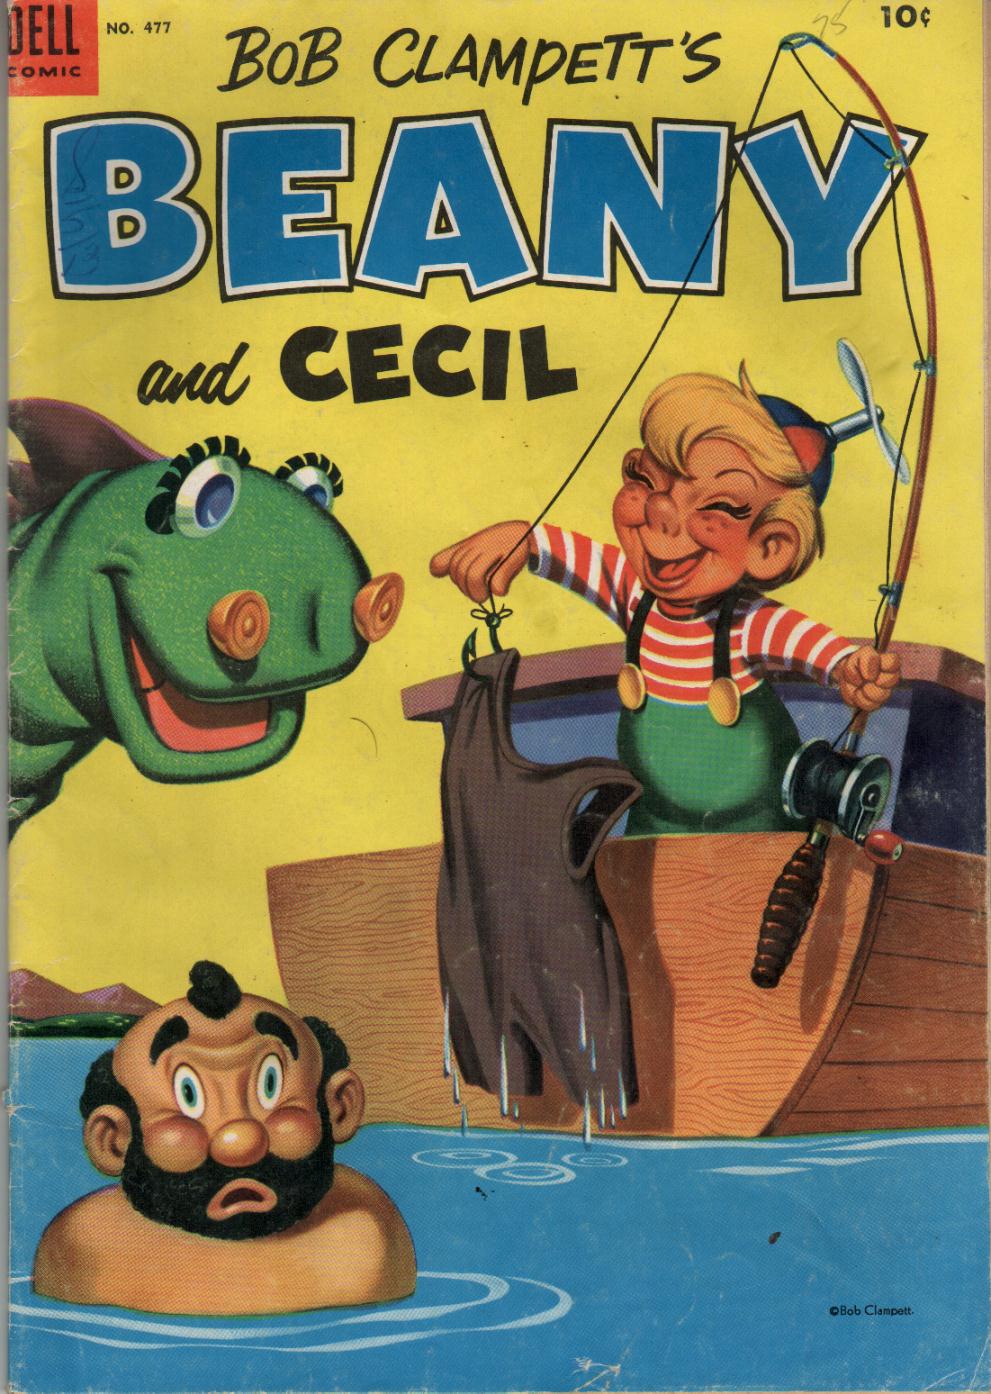 Comic Book Cover For 0477 - Beany and Cecil